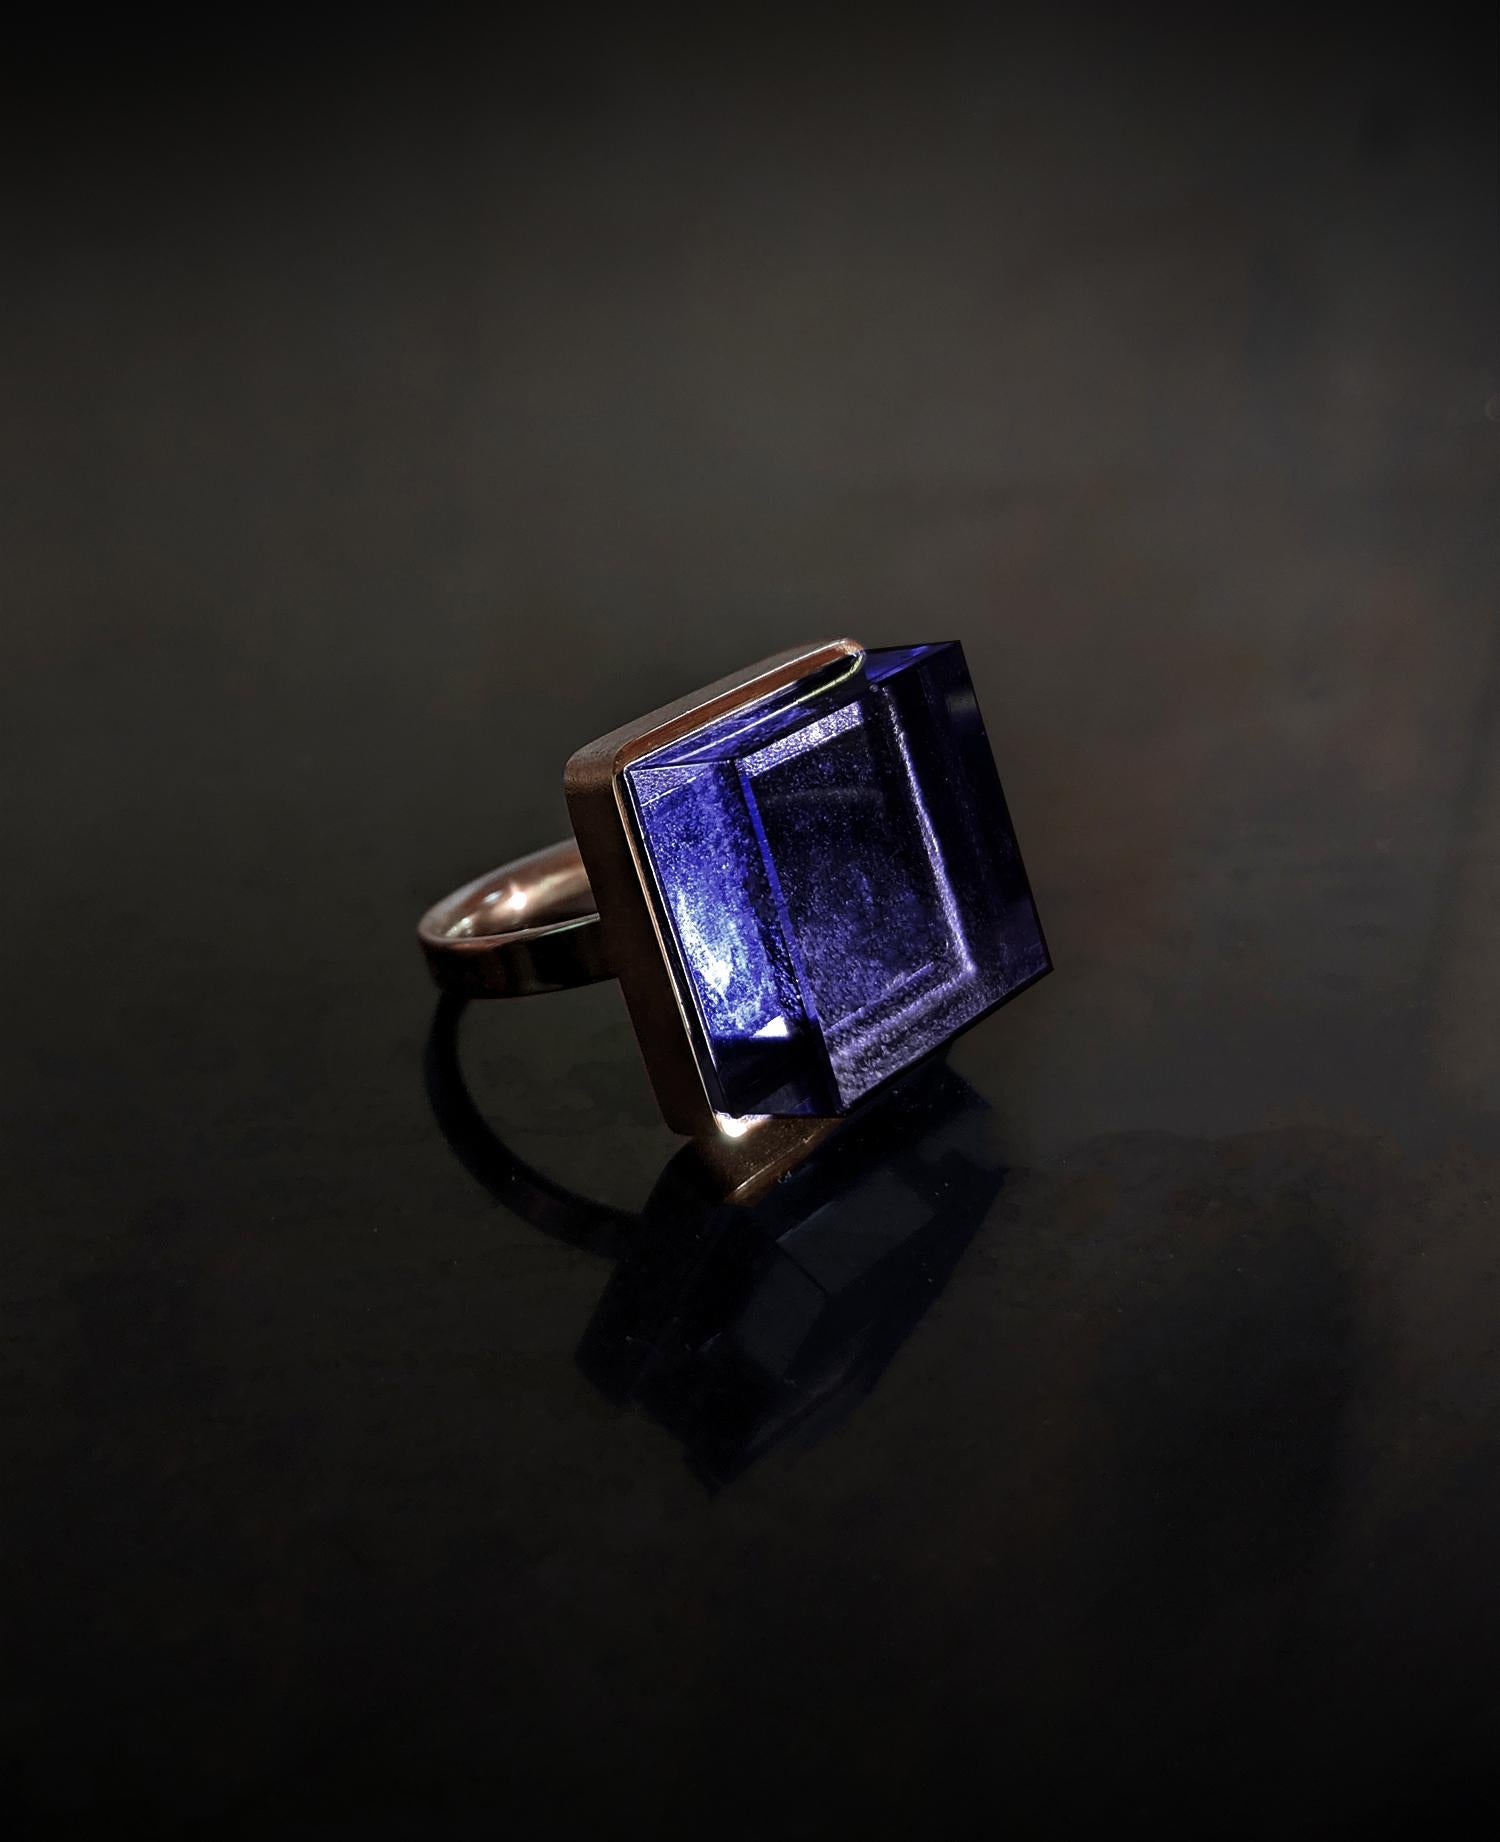 This fashion men's ring is crafted in 18 karat rose gold and features a 15x15x8 mm dark vivid grown amethyst. It has been featured in fashion magazines like Harper's Bazaar and Vogue UA.

With its Art Deco spirit, this ring is a versatile piece that